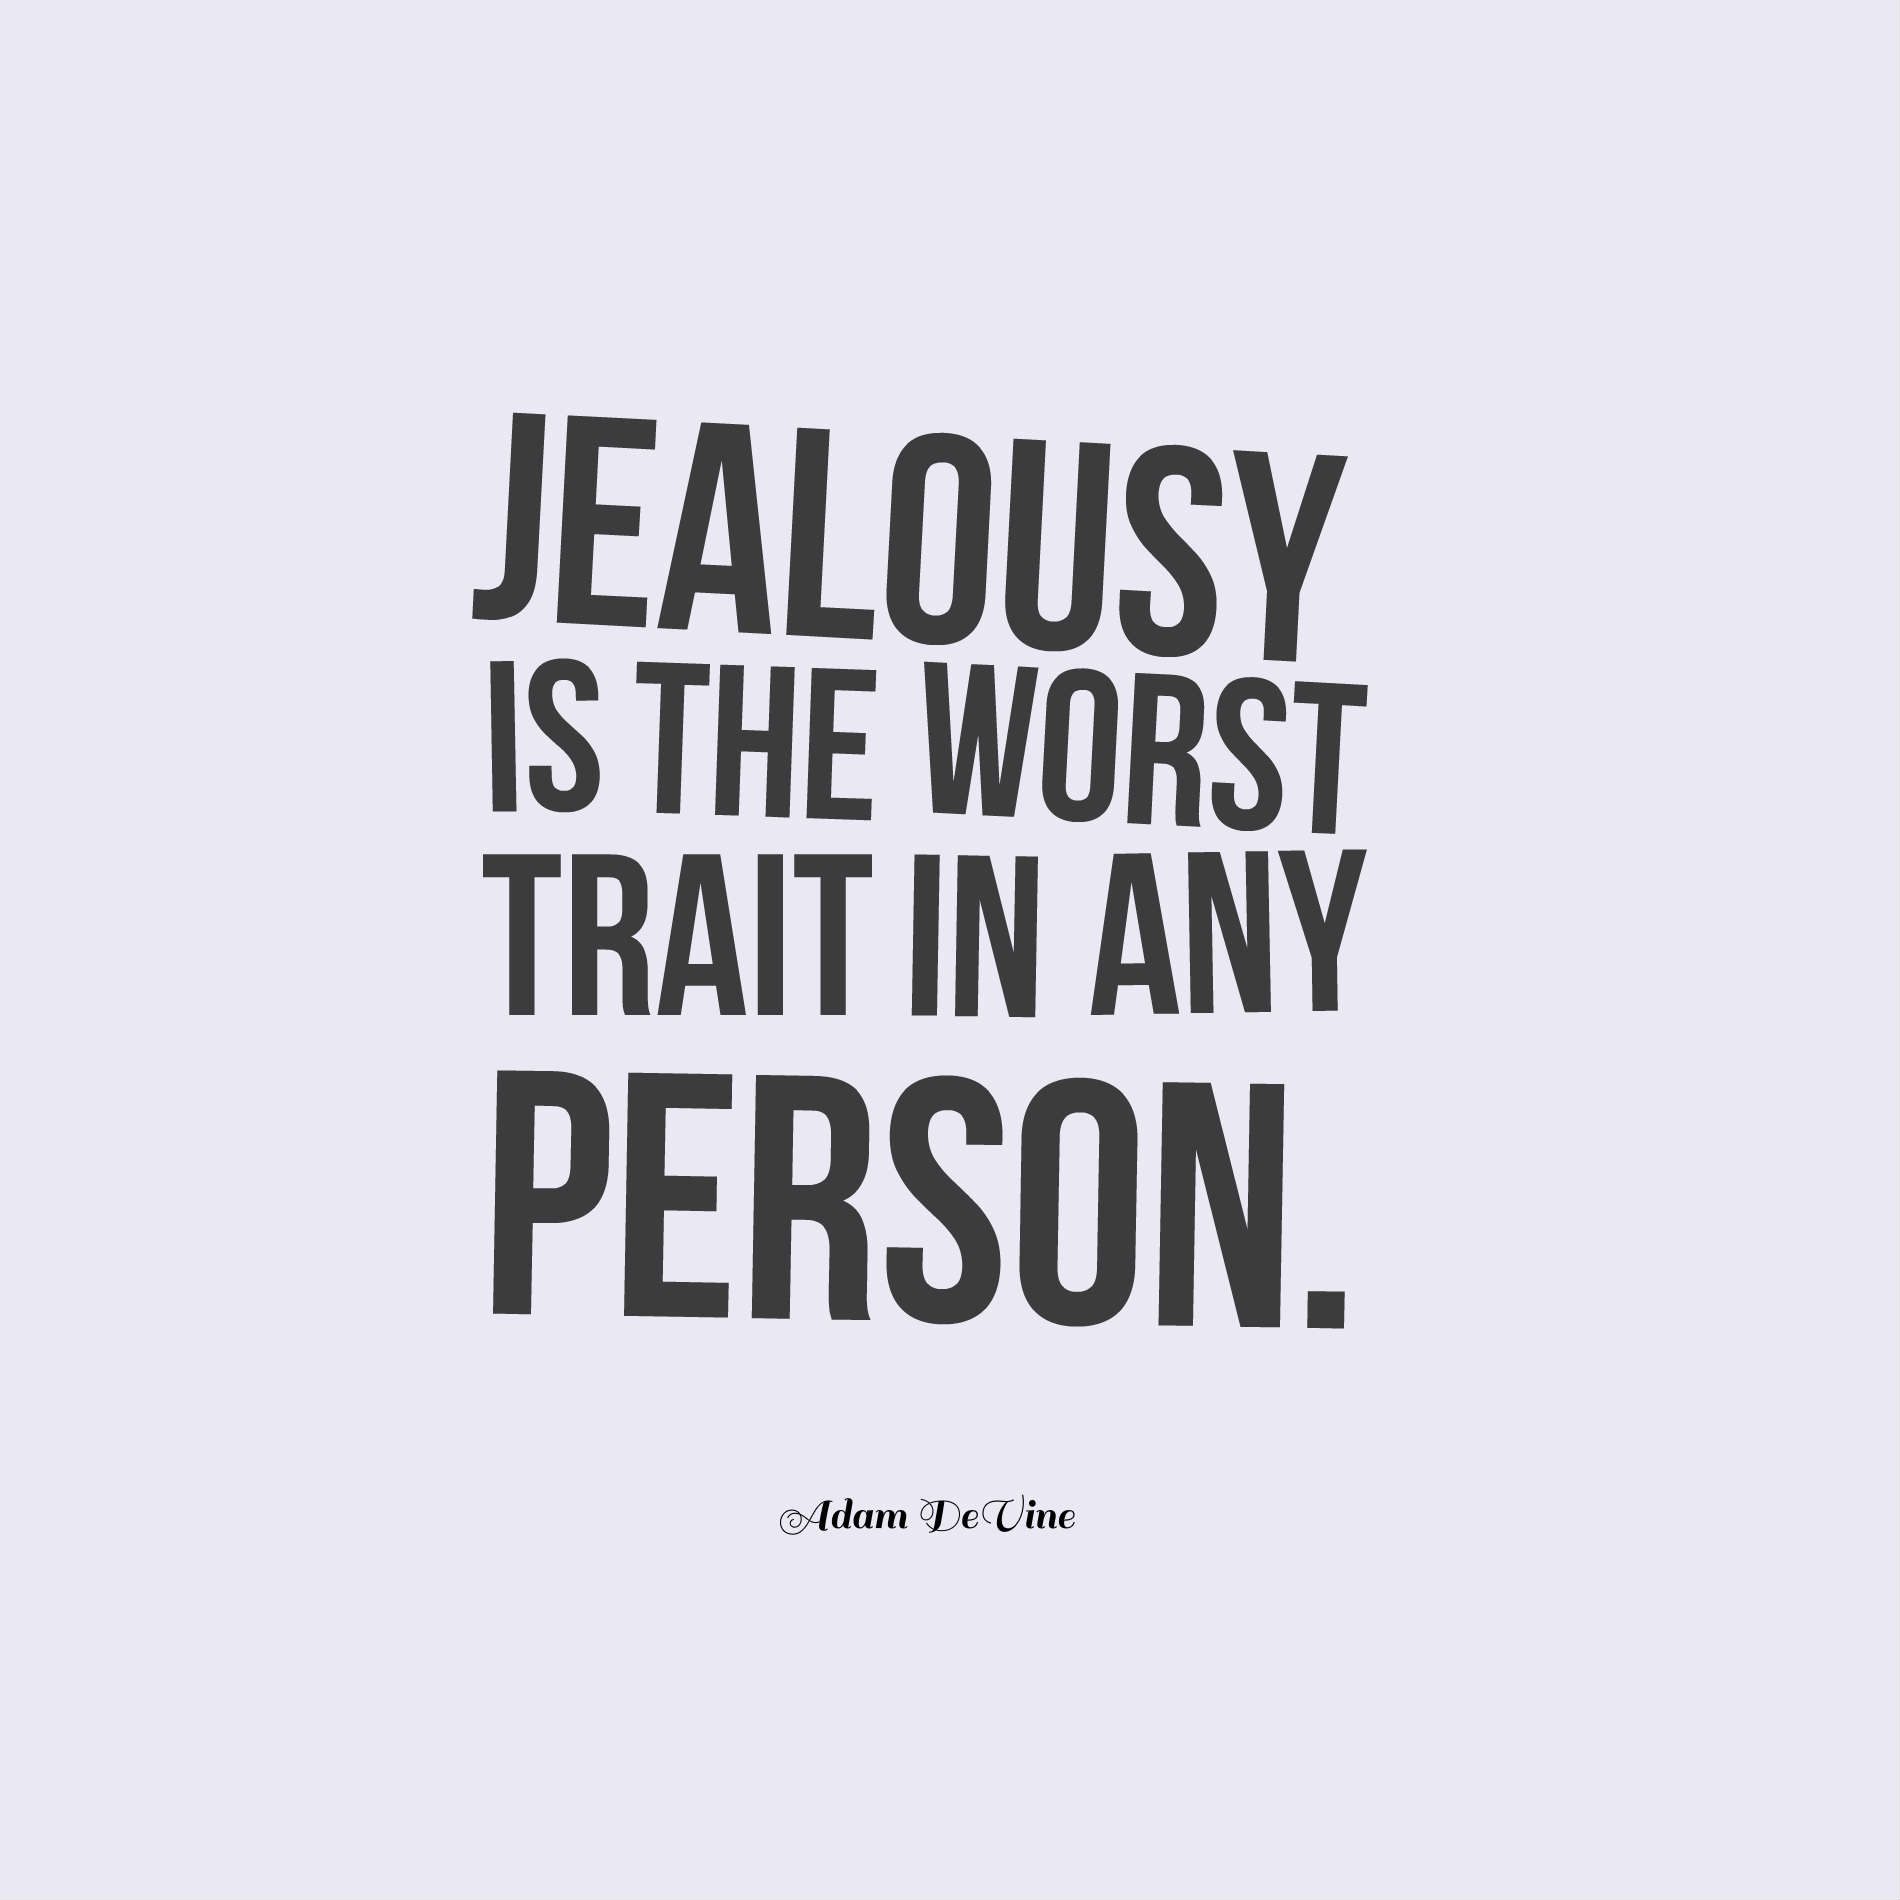 Jealousy is the worst trait in any person.